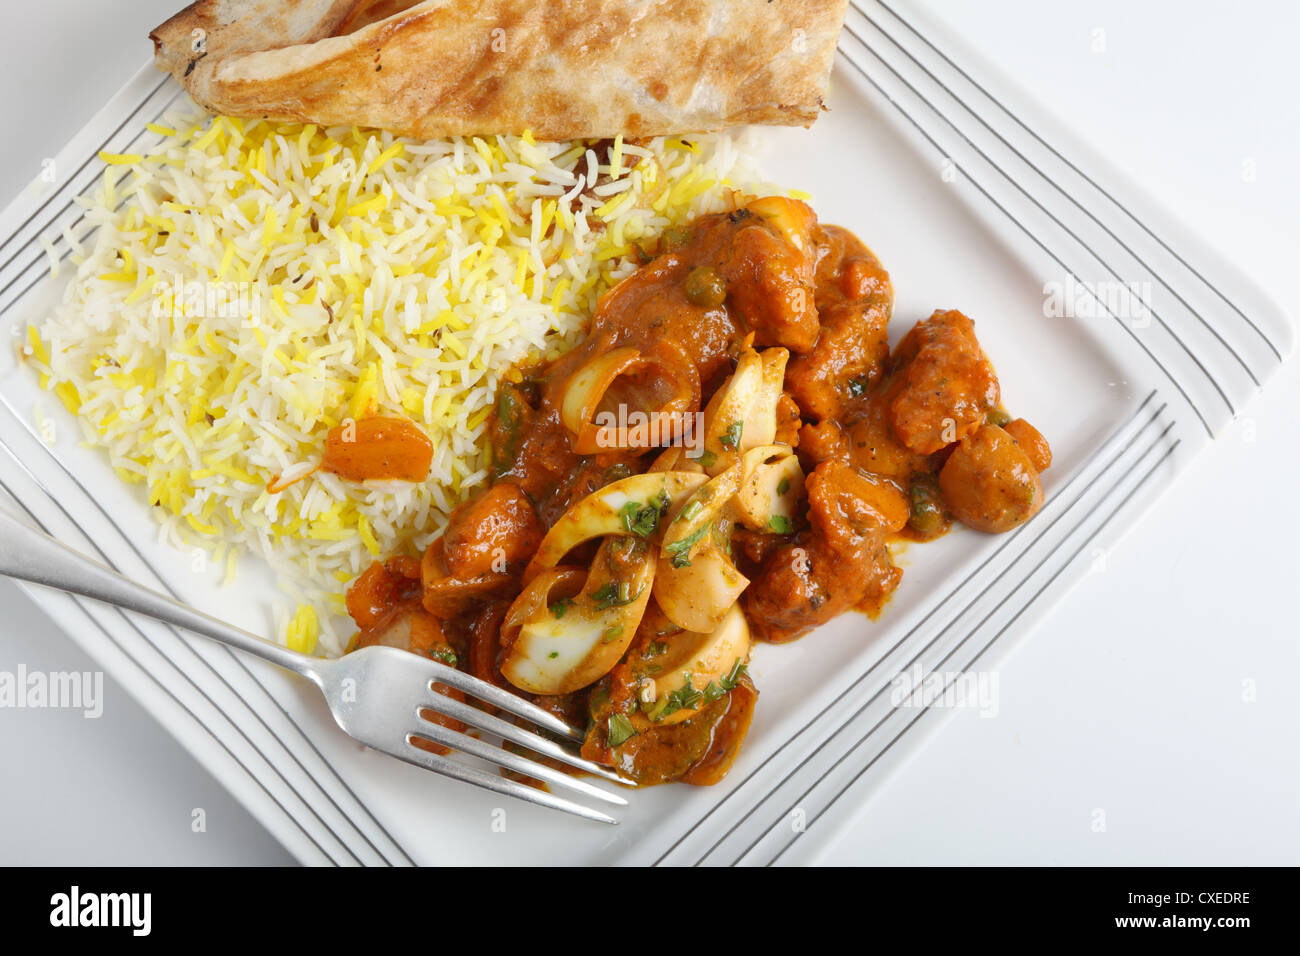 Chicken jalfrezi curry on a plate with pilau rice, a piece of naan bread and a fork from above. Stock Photo